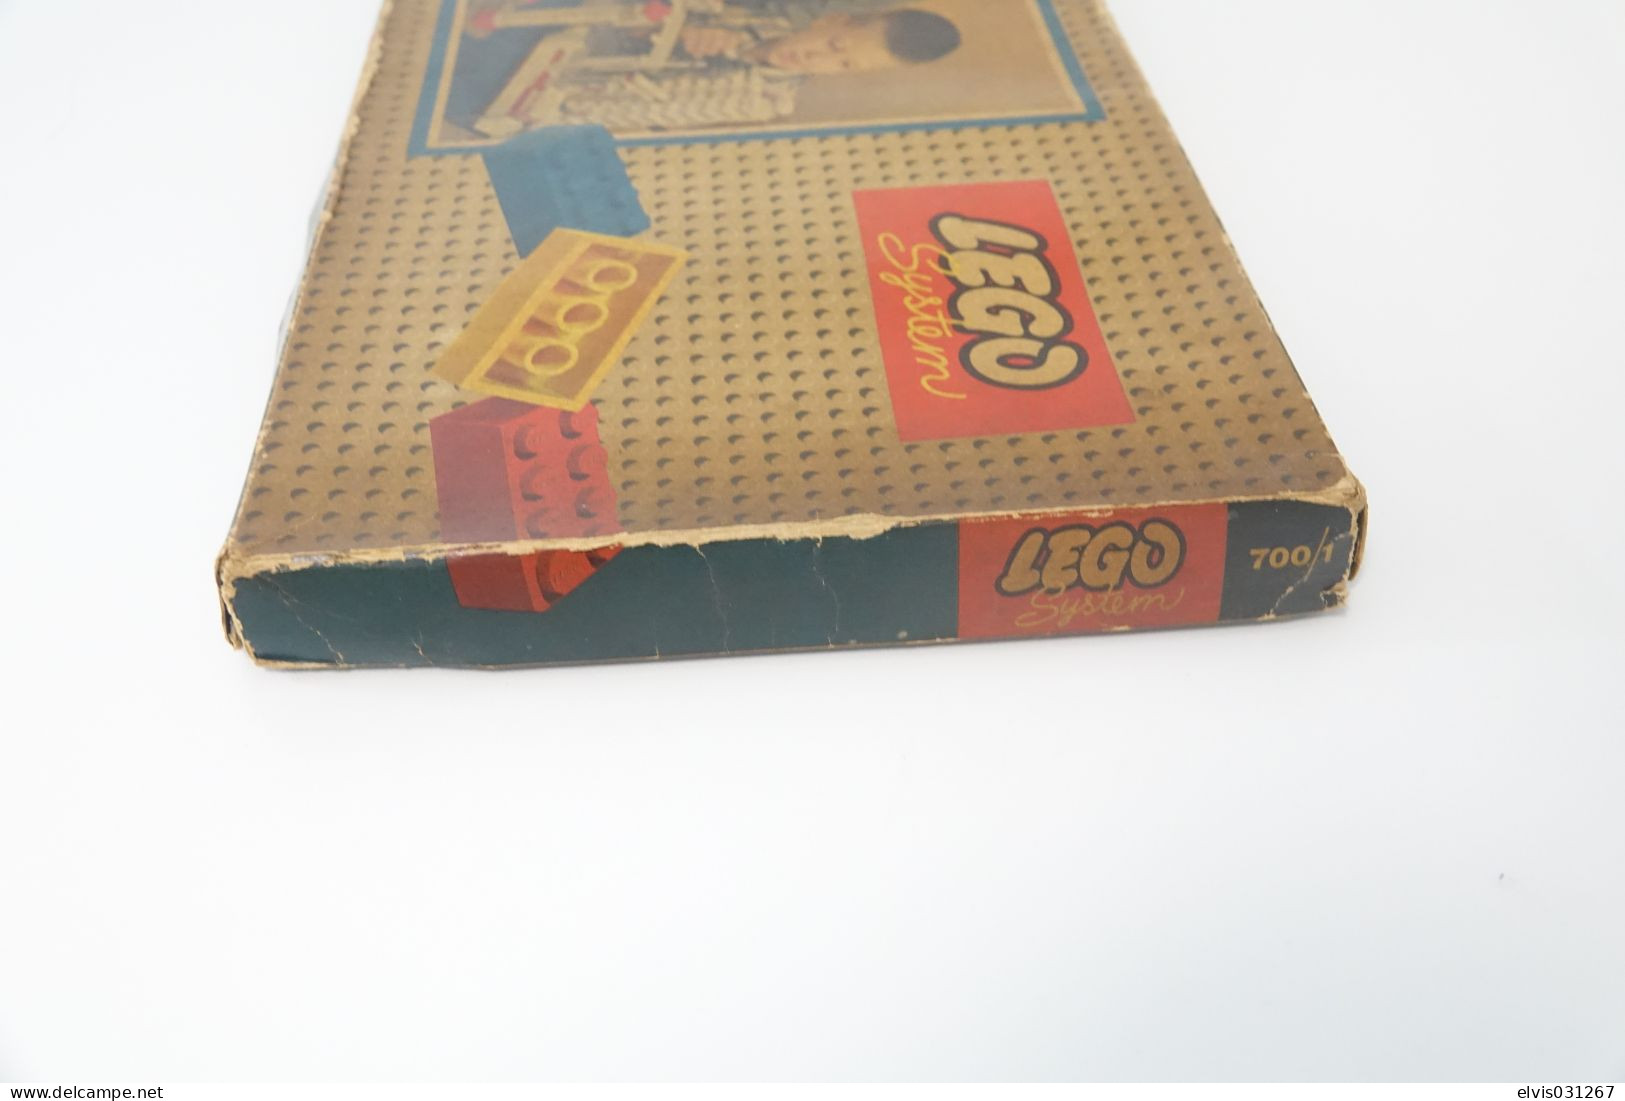 LEGO - 700/1 Gift Package (Lego Mursten) Extremely Rare 1st Edition - Collector Item - Original Lego 1956 - Vintage - Catalogi